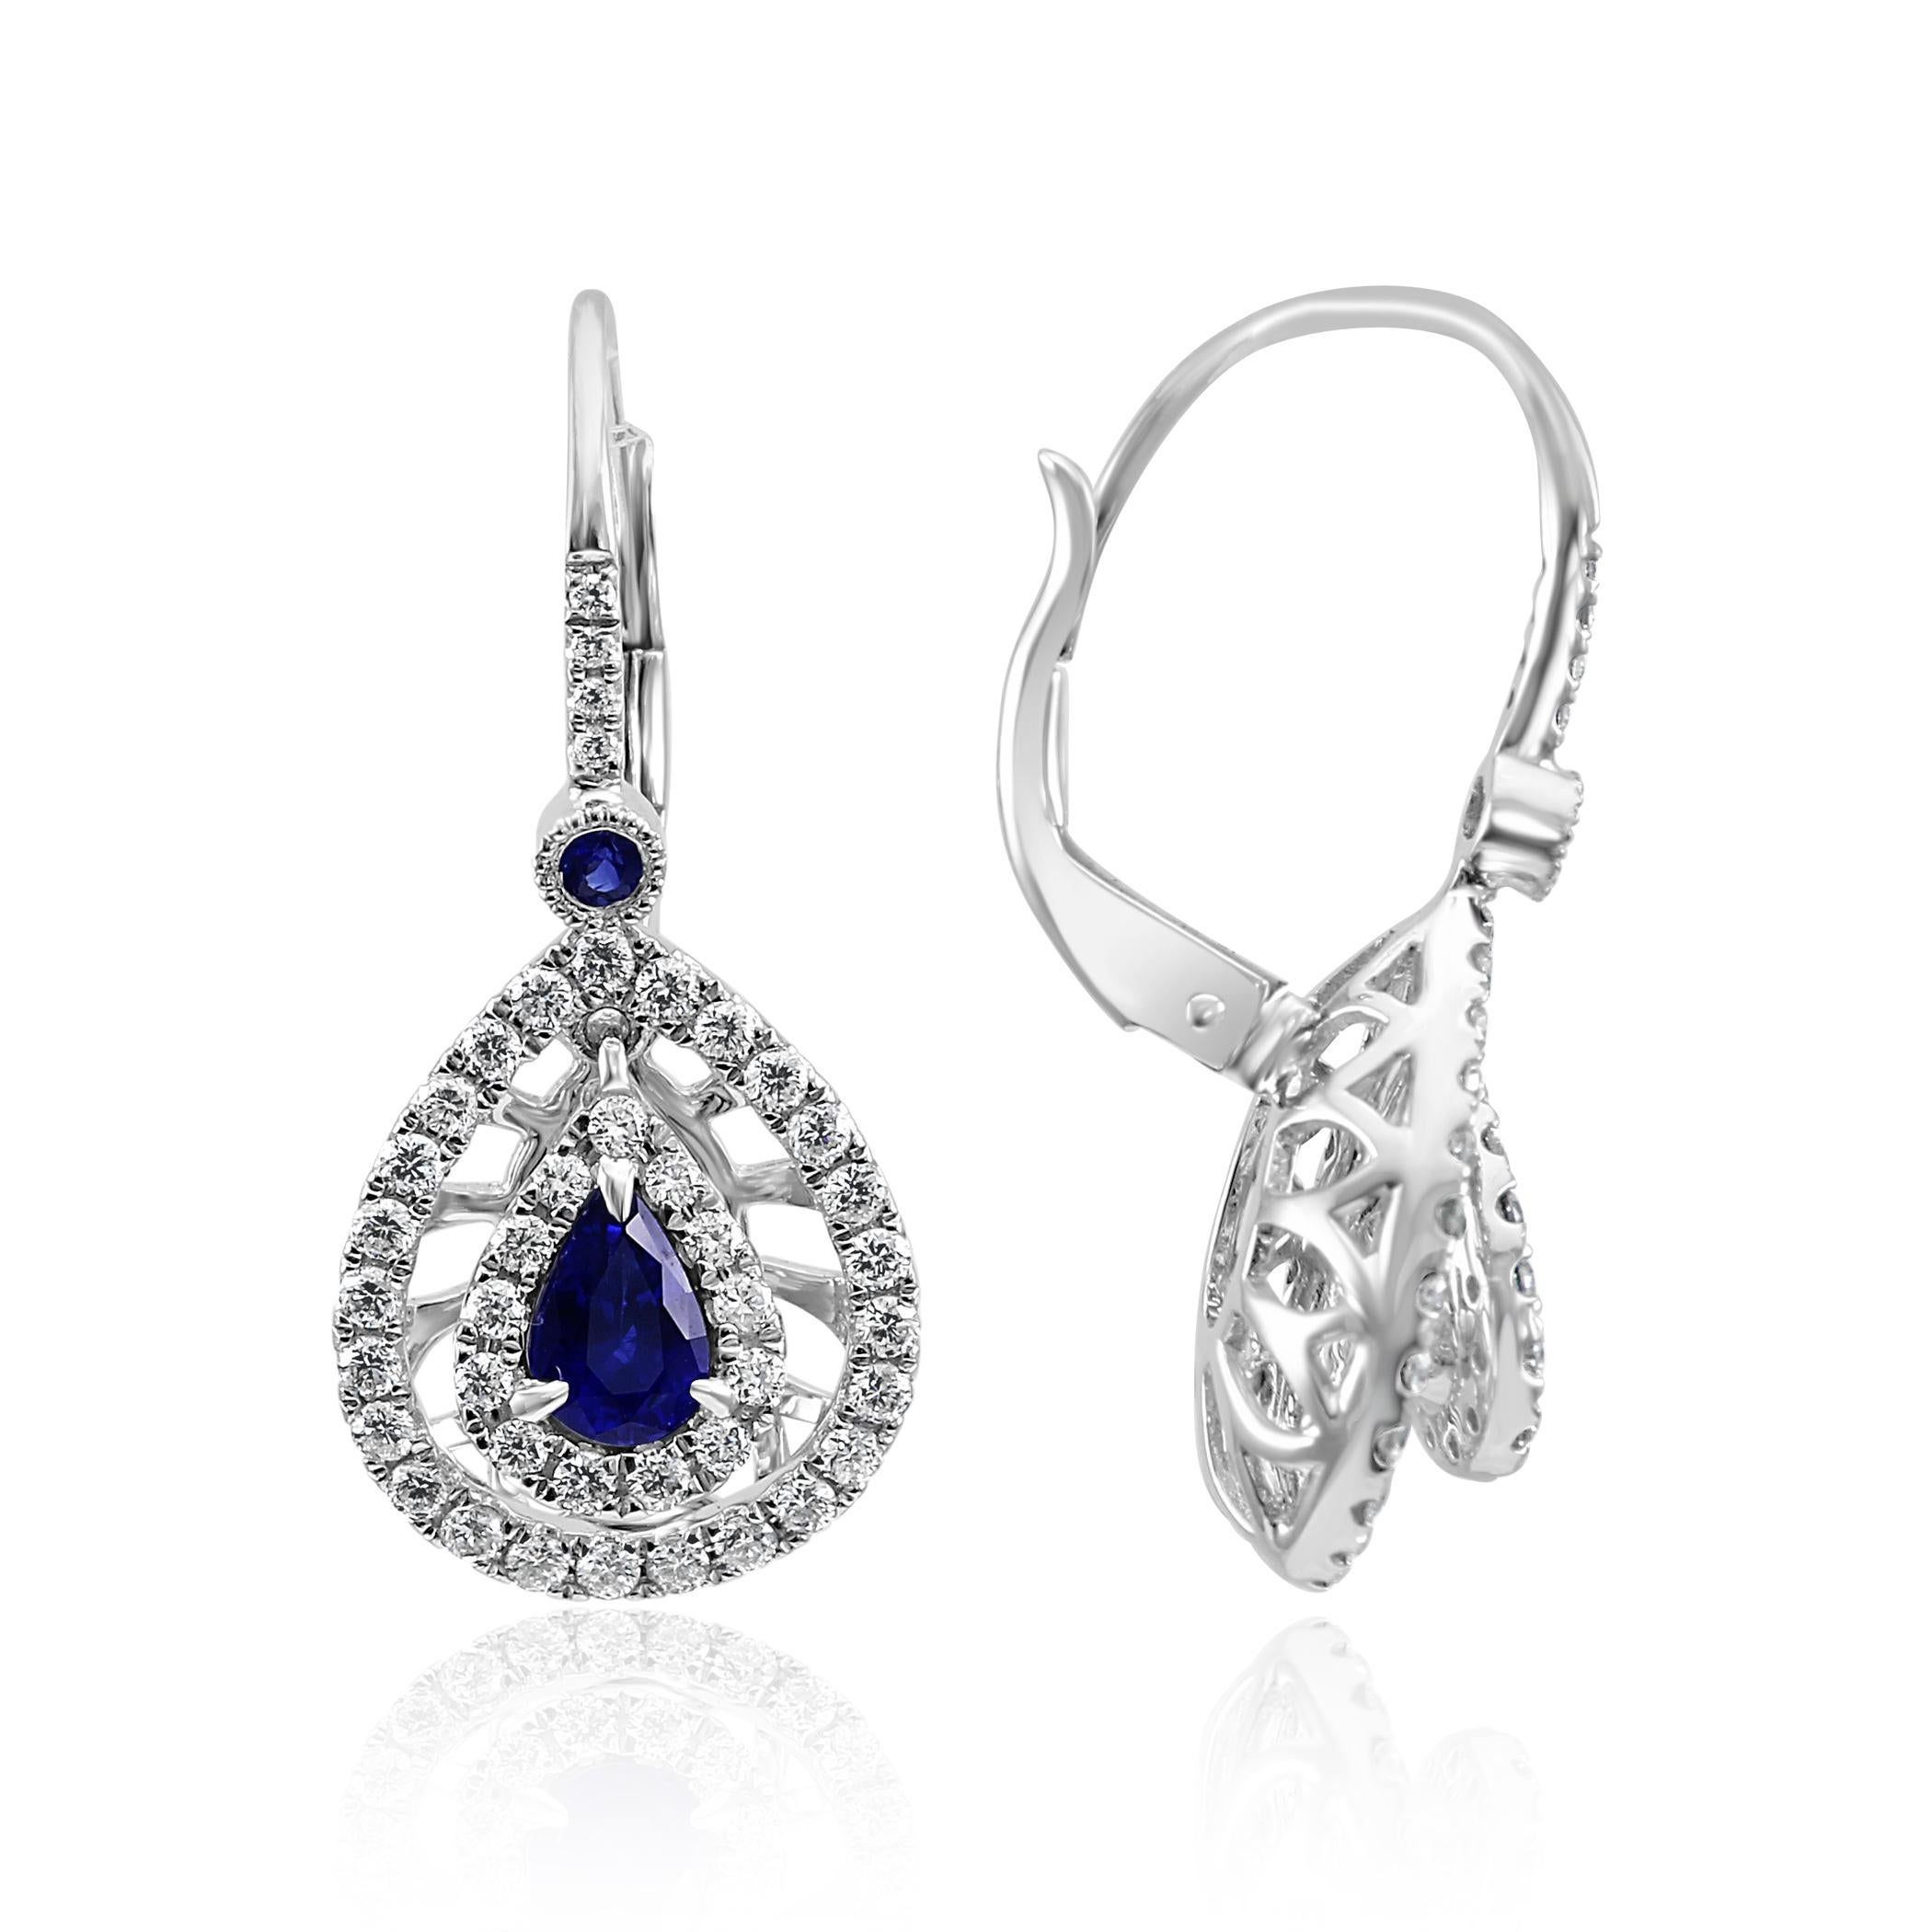 Gorgeous 2 Blue Sapphire Pear 1.10 Carat Encircled in Double Halo of 84 White G-H Color VS-SI Round Diamonds 0.98  Carat with 2 Blue Sapphire Round 0.07 carat on Top set in stunning 14K White Gold Dangle Drop Fashion Clip on Earrings.

Total Stone